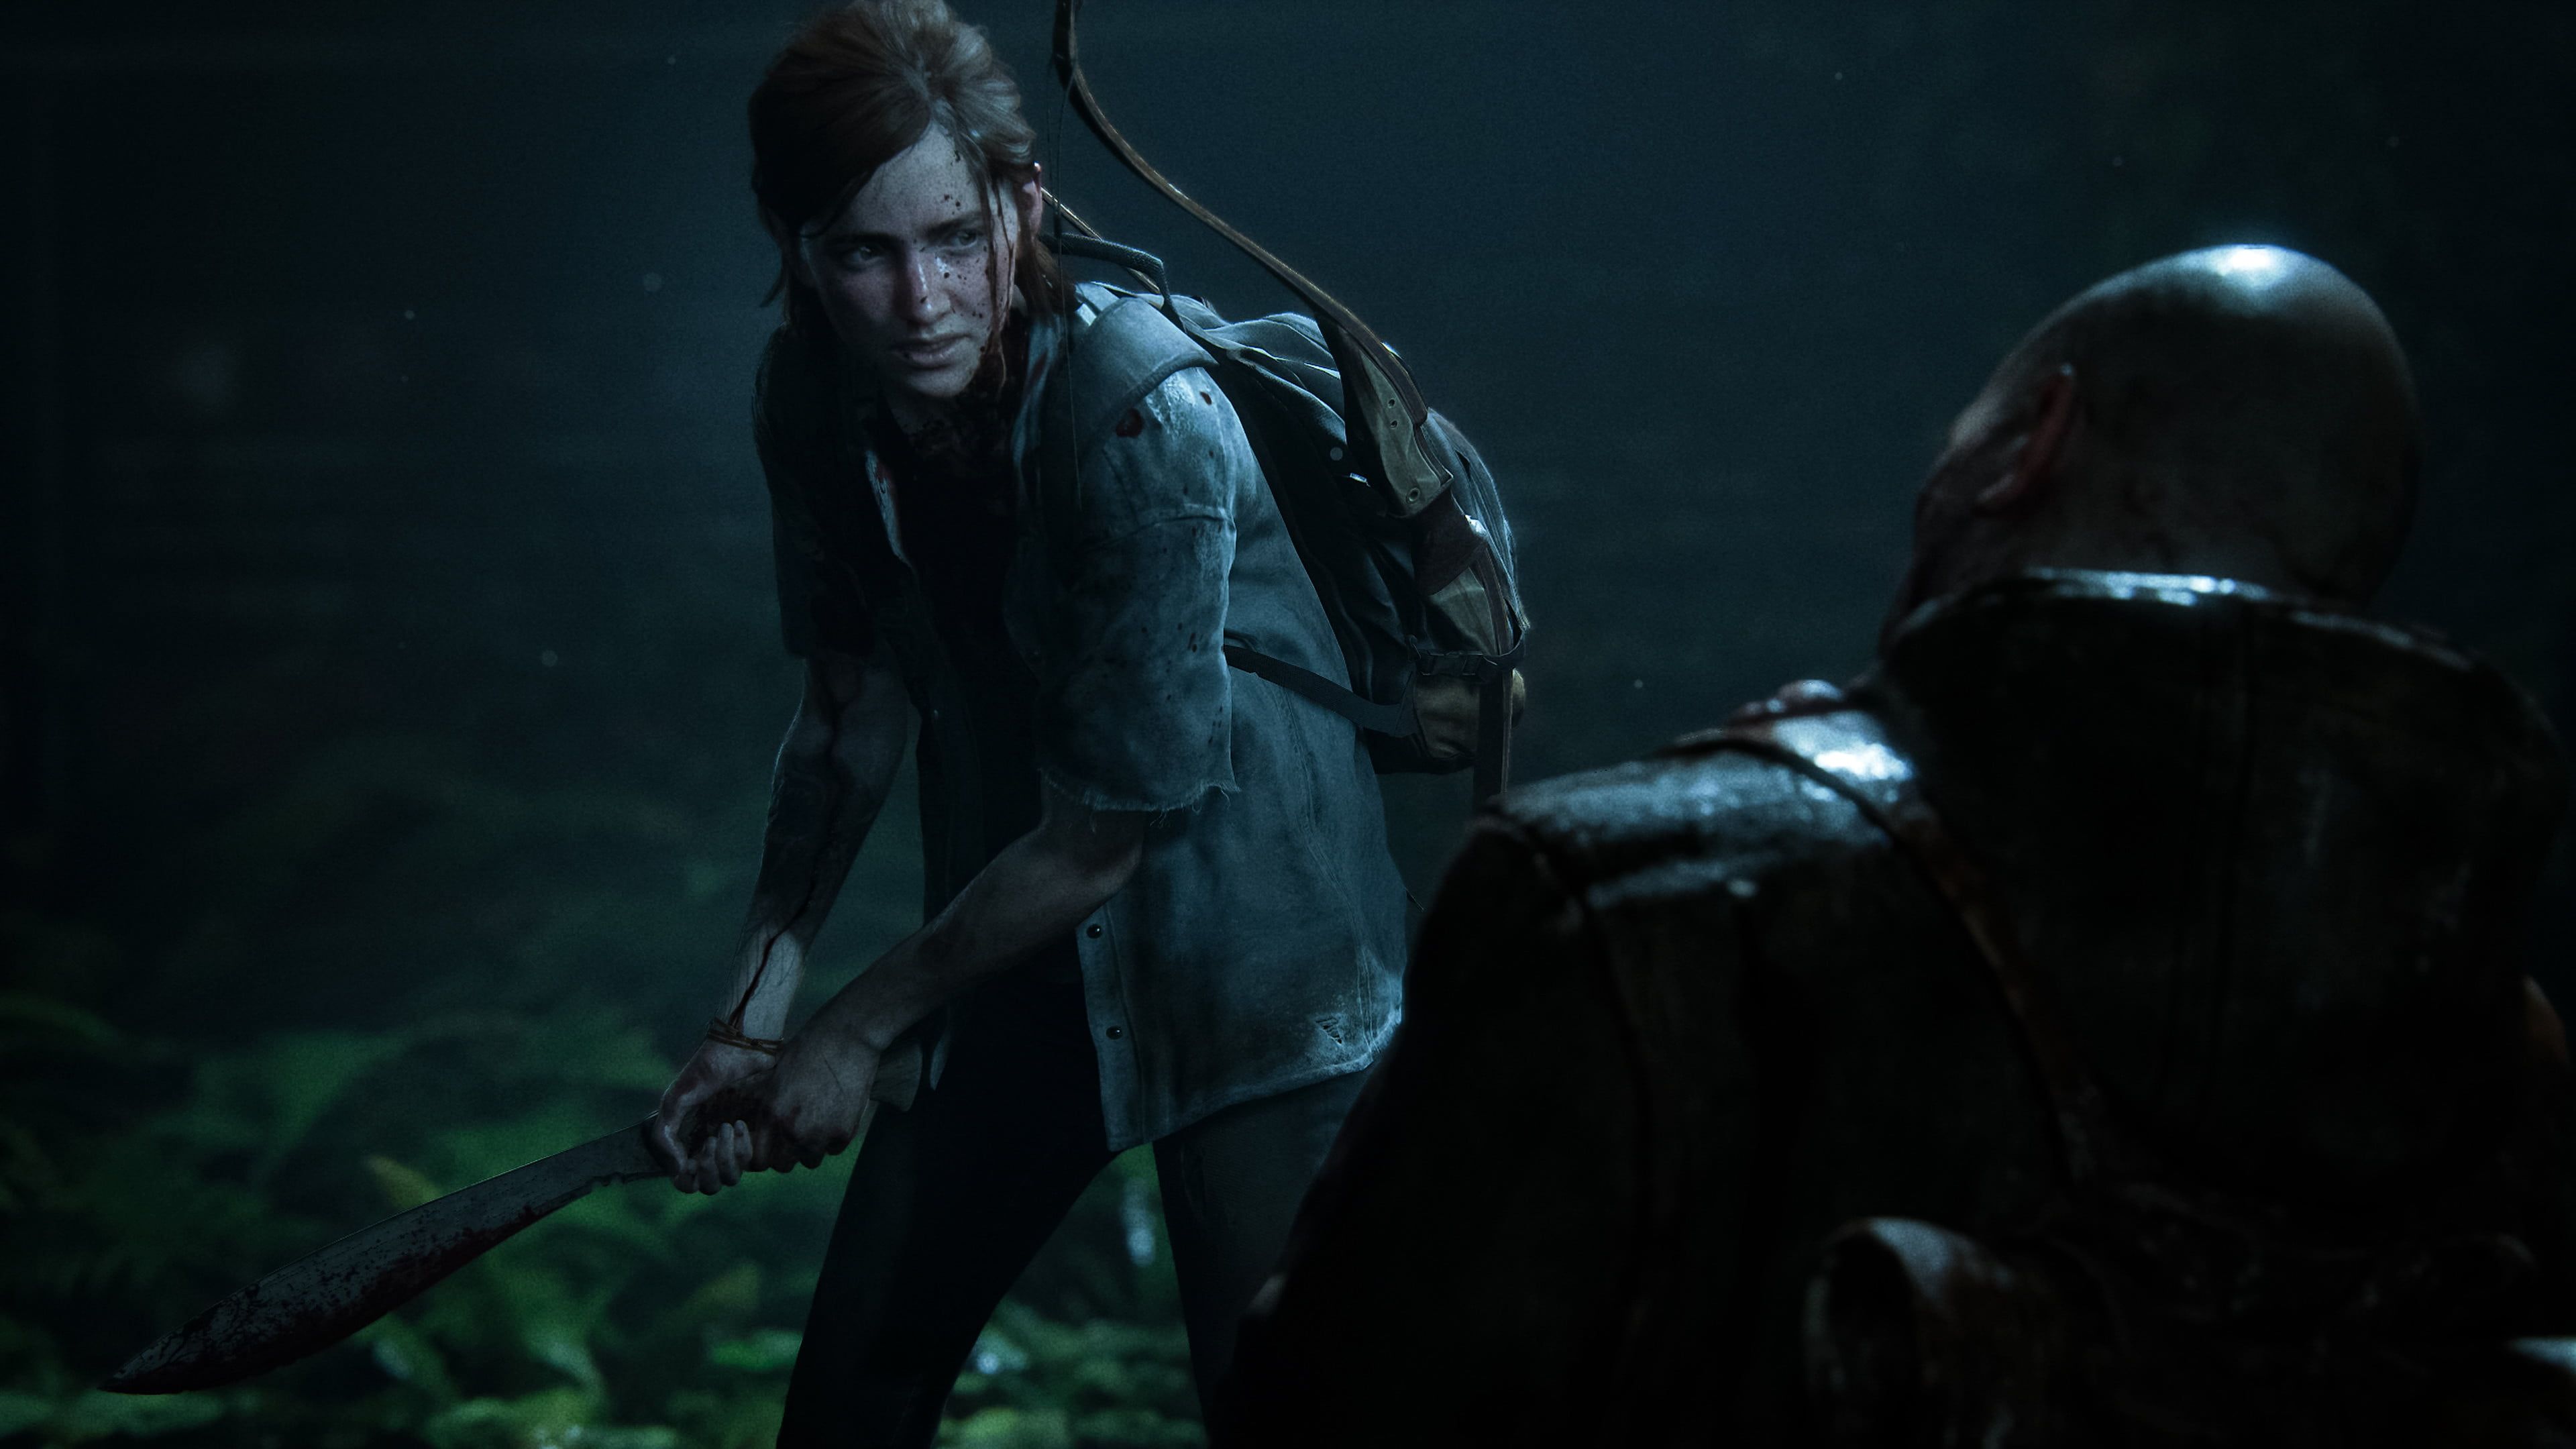 New The Last Of Us Part 2 Trailer Centers On Abby - Game Informer